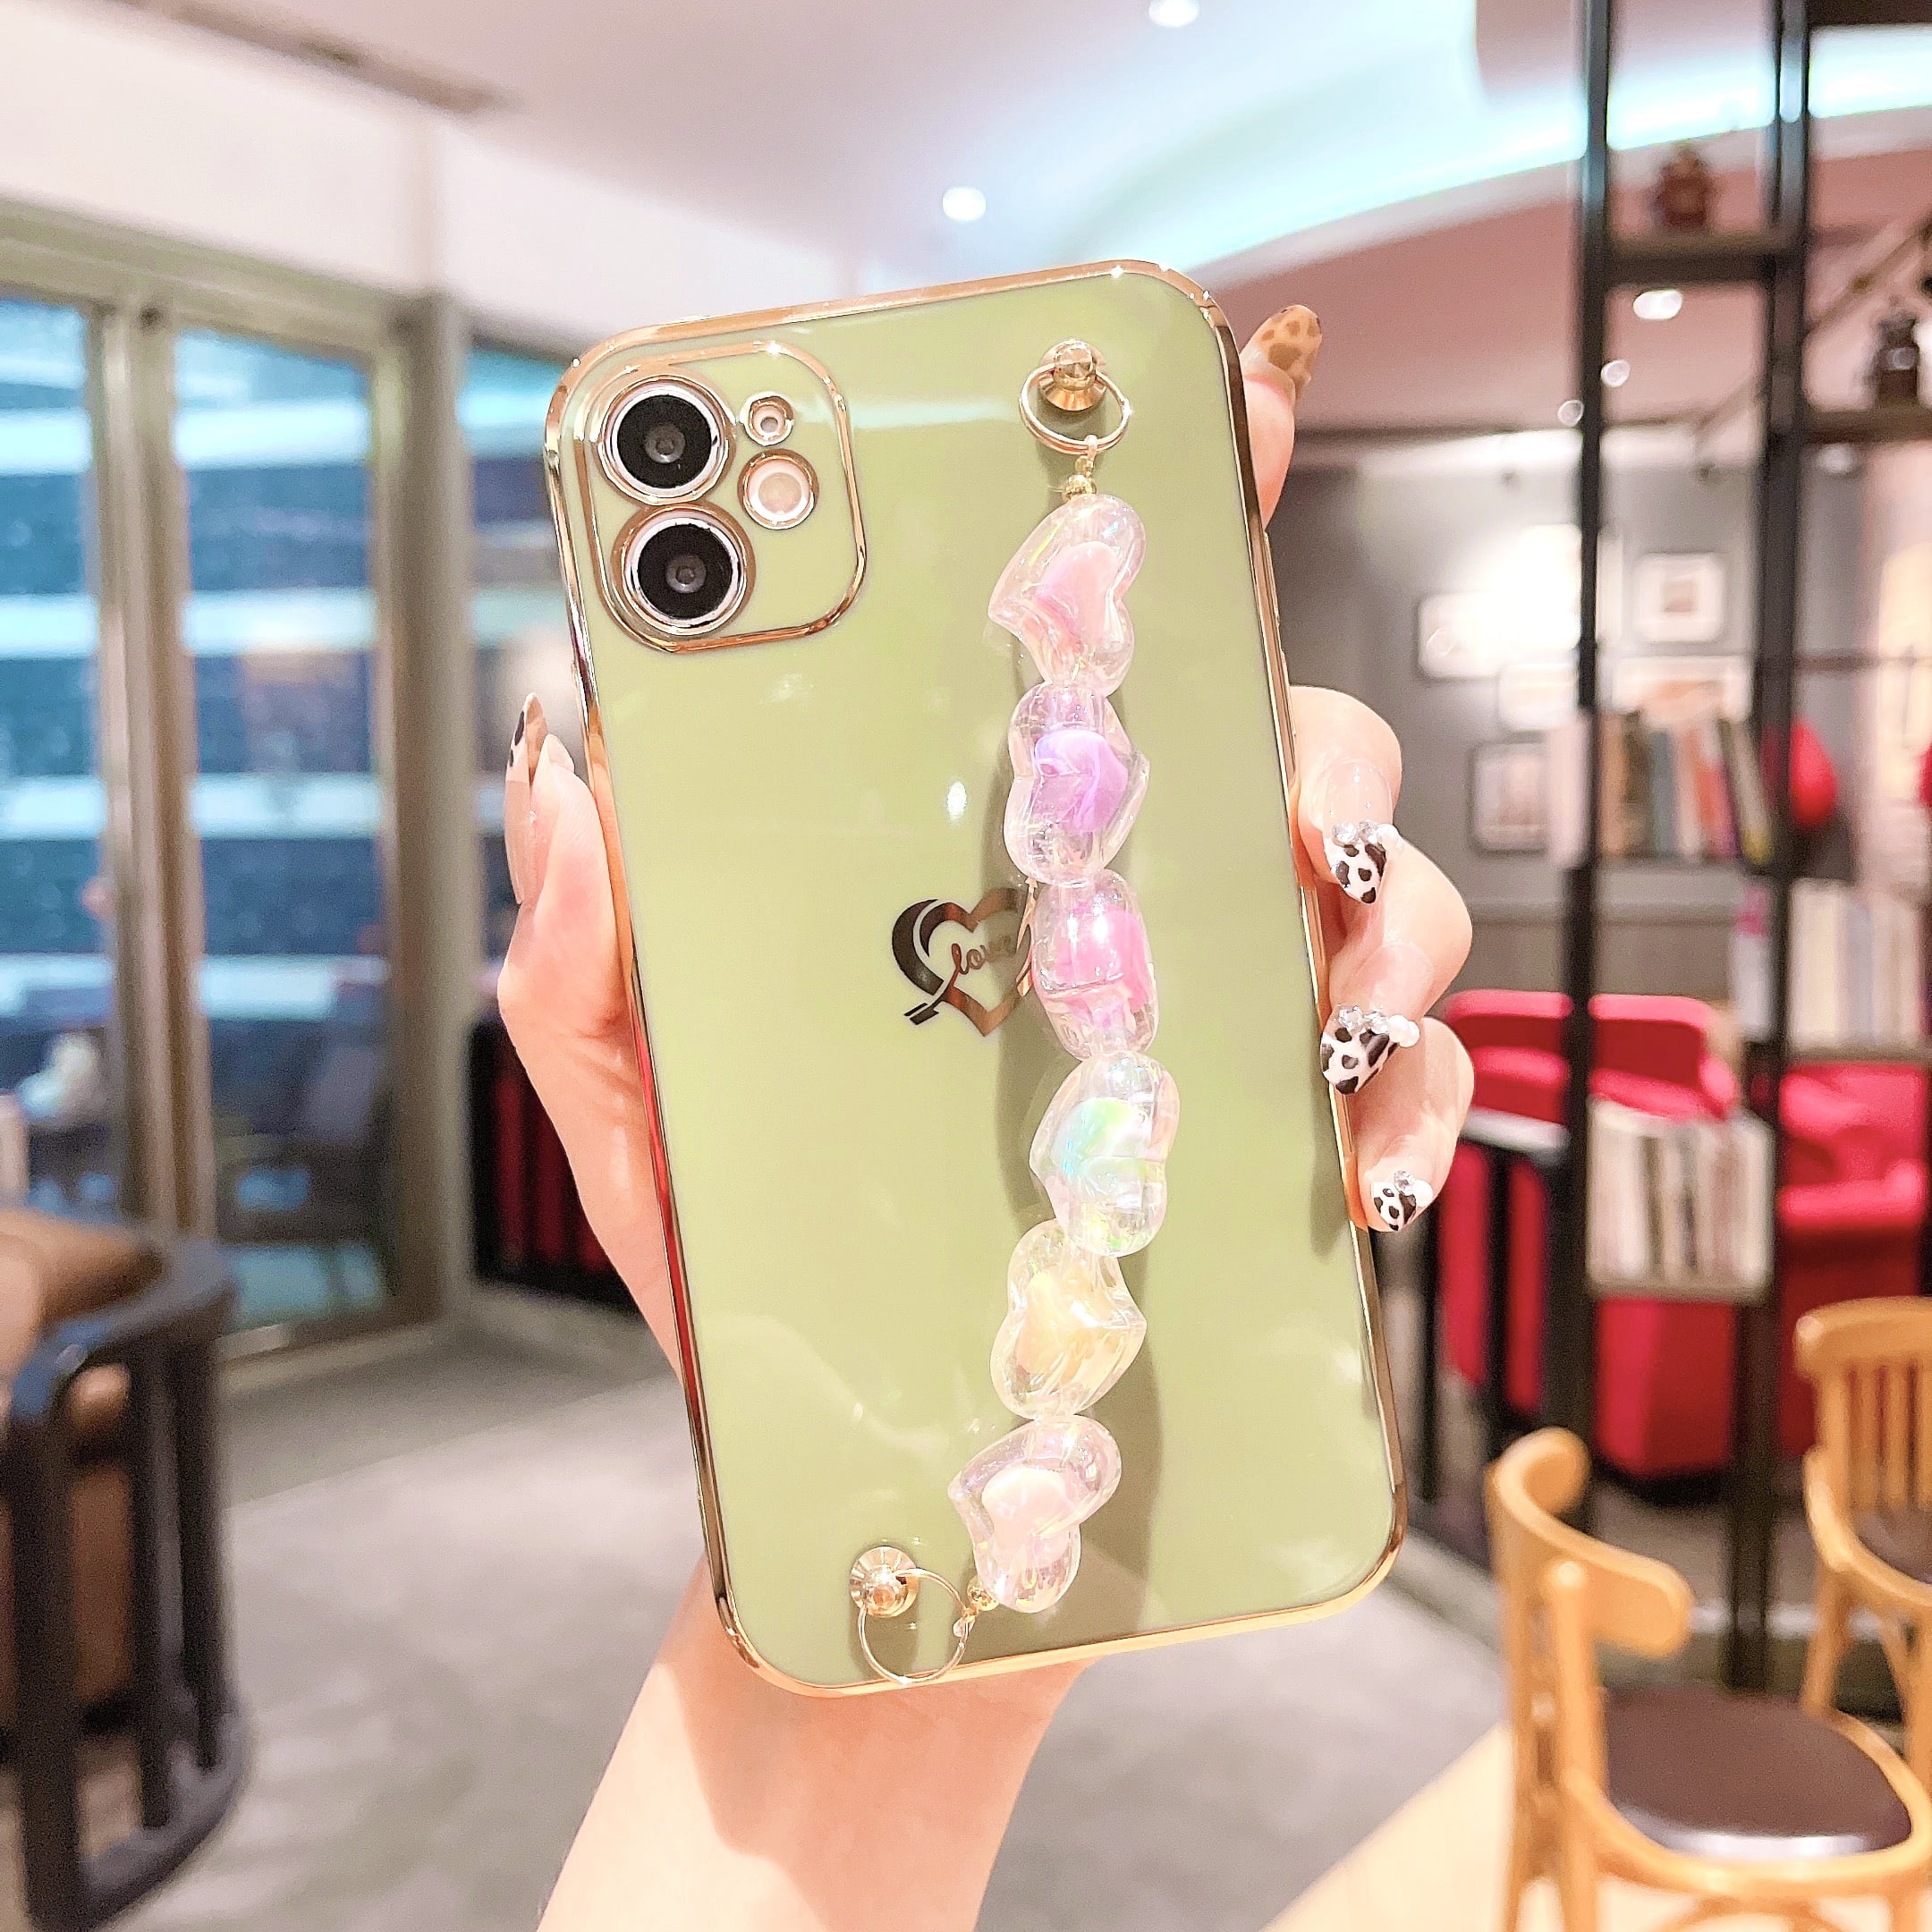 Dteck Luxury iPhone 11 Pro Max Cute Case for Women,Sparkle Plating Heart  Case with Chain Strap Camera Lens Protective Girly Case For iPhone 11 Pro